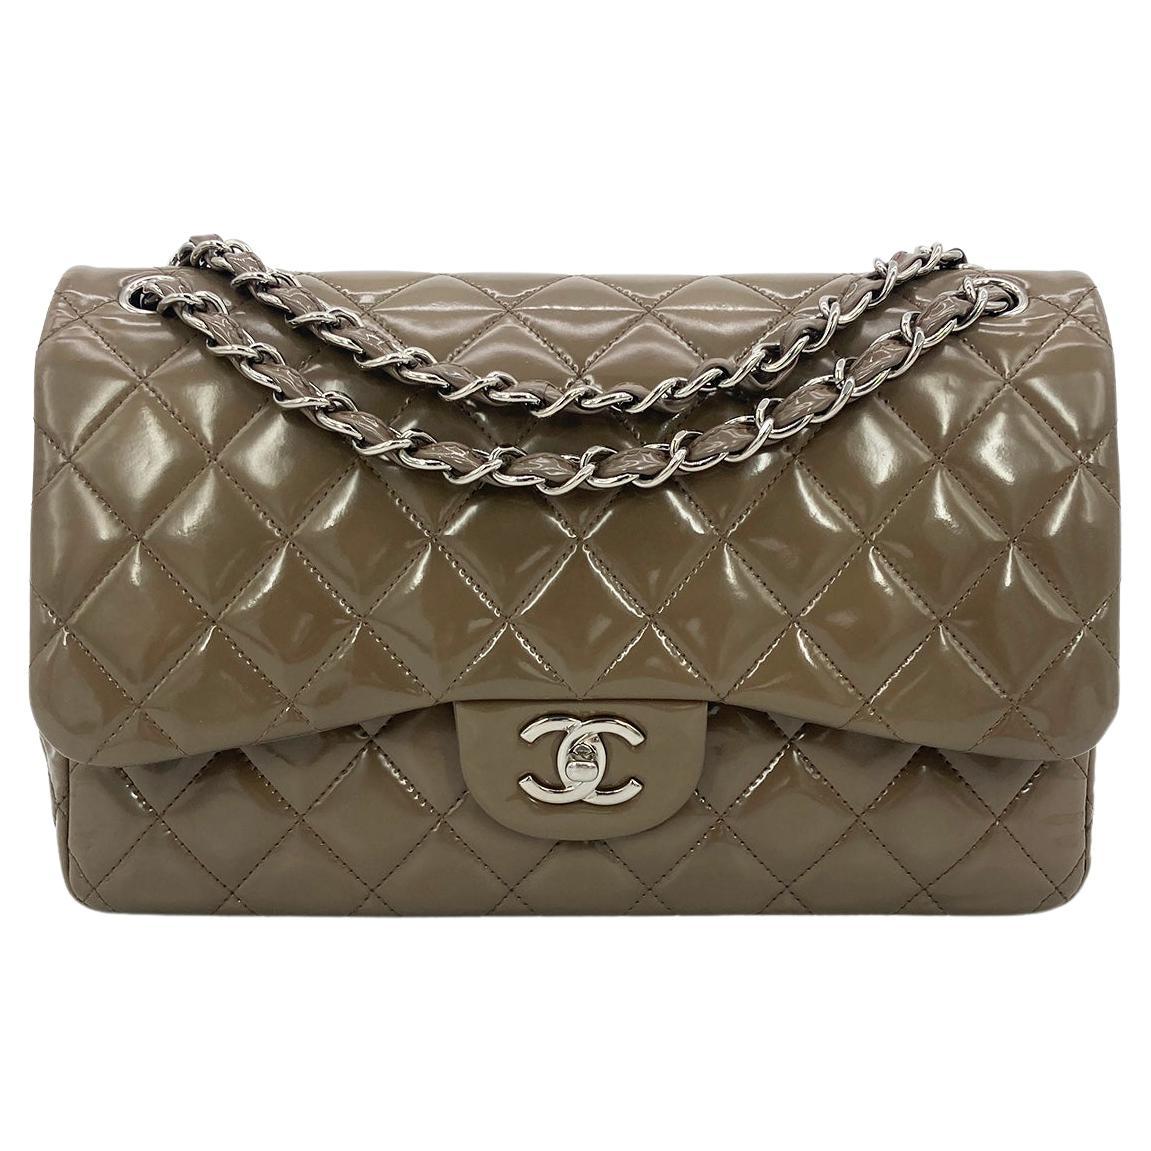 Amazing Chanel Shopping Tote bag in White Caviar quilted leather